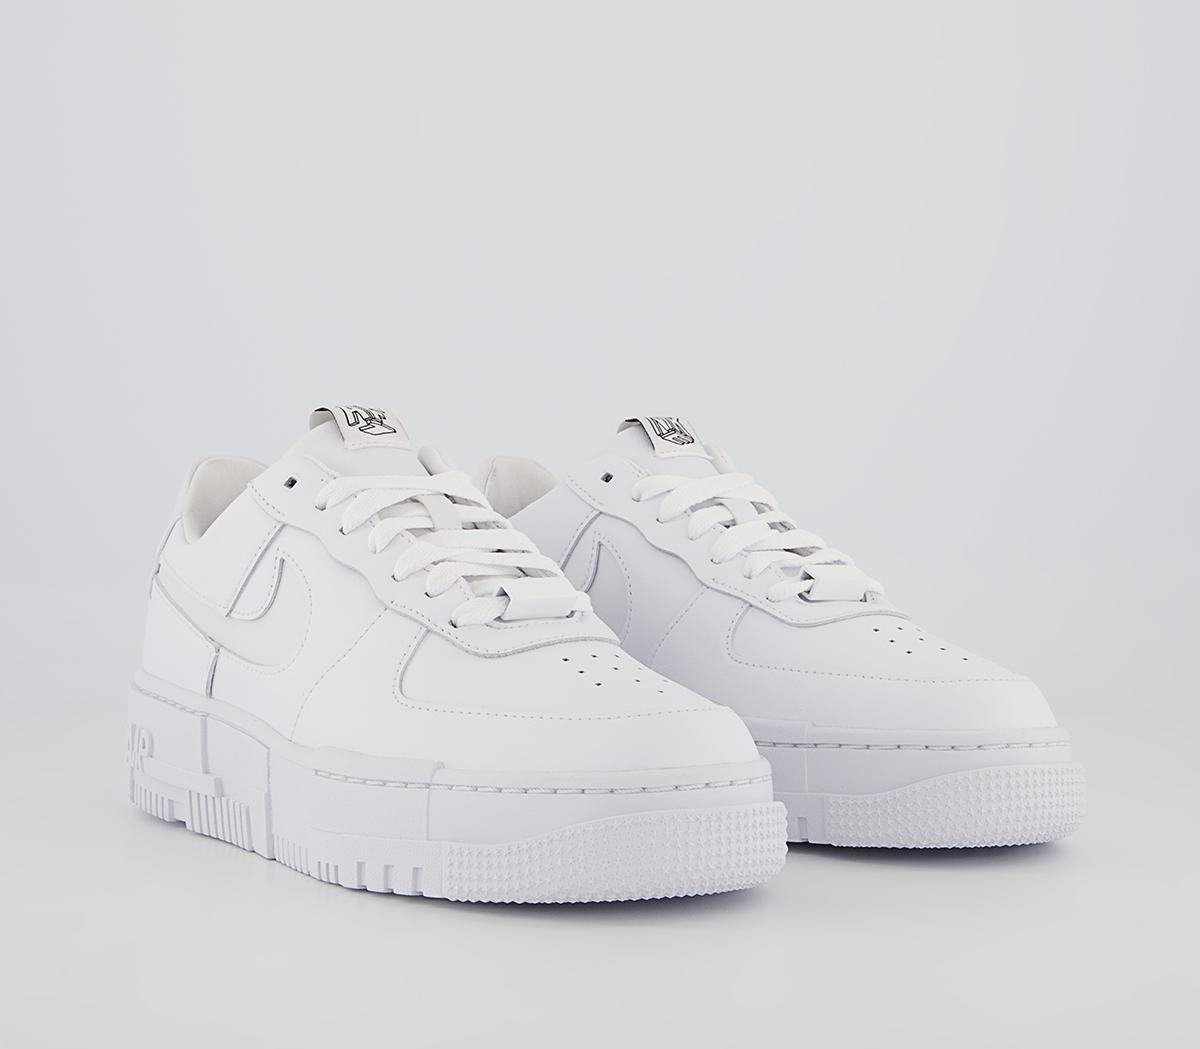 Nike Air Force 1 Pixel Trainers White White Black Sail - Women's Trainers